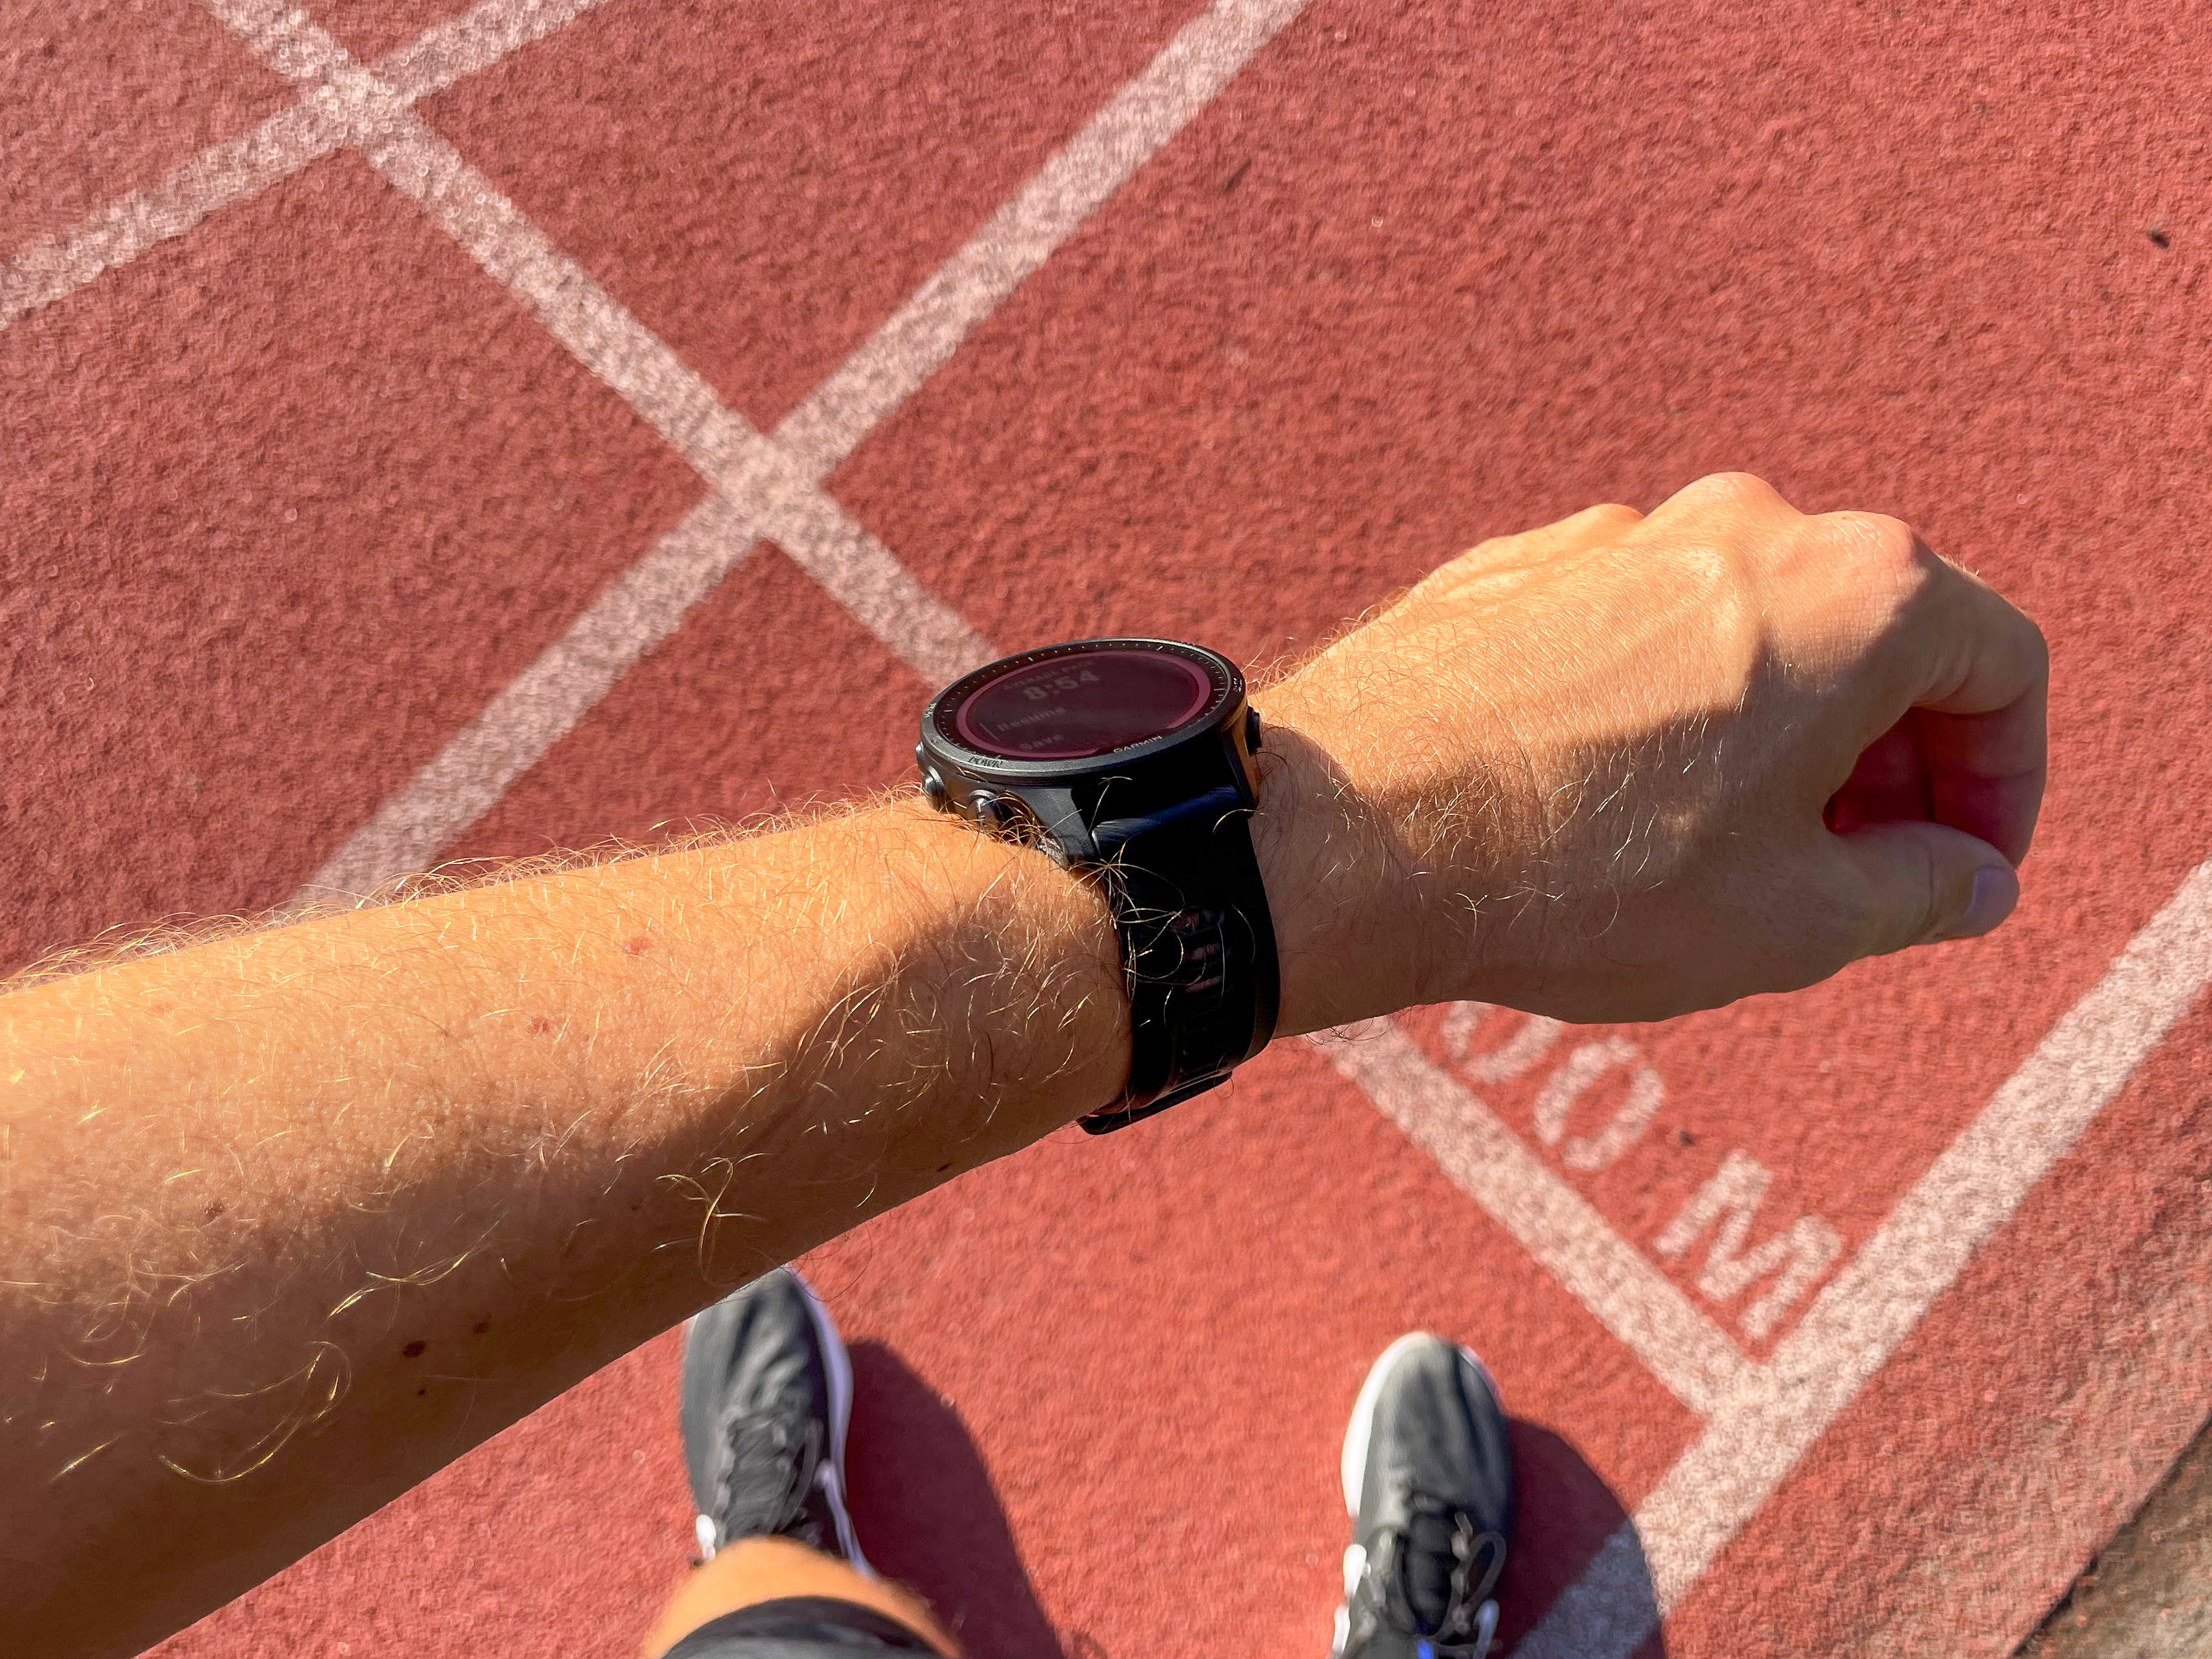 Garmin Forerunner 955 review: After 200 miles of testing